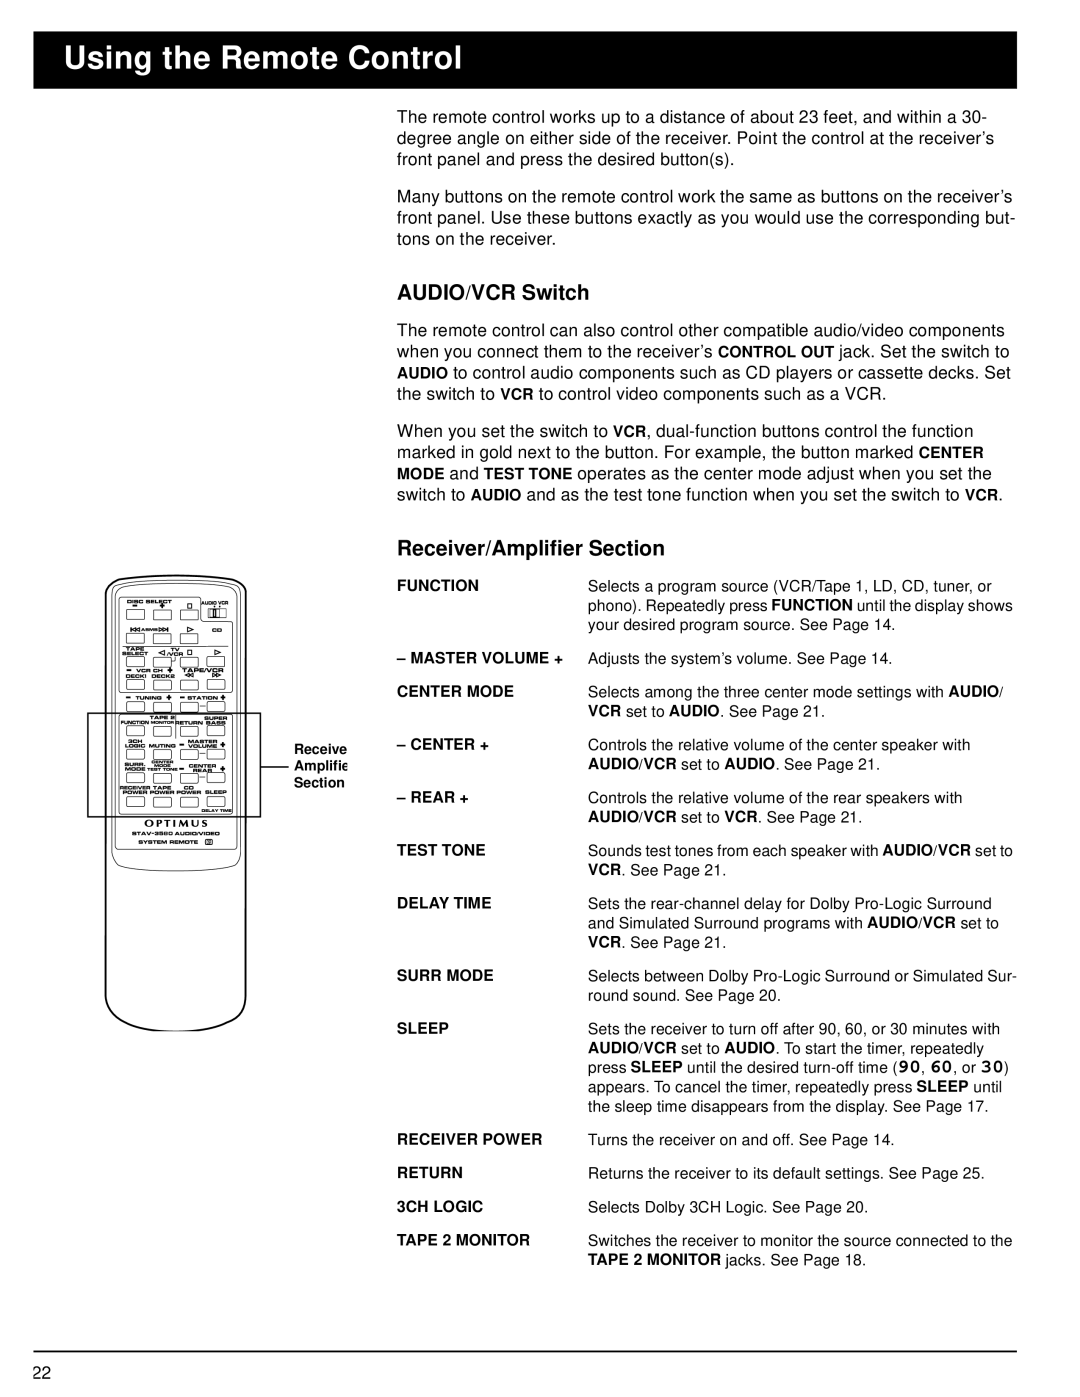 Optimus STAV-3580 owner manual Using the Remote Control, AUDIO/VCR Switch, Receiver/Amplifier Section 